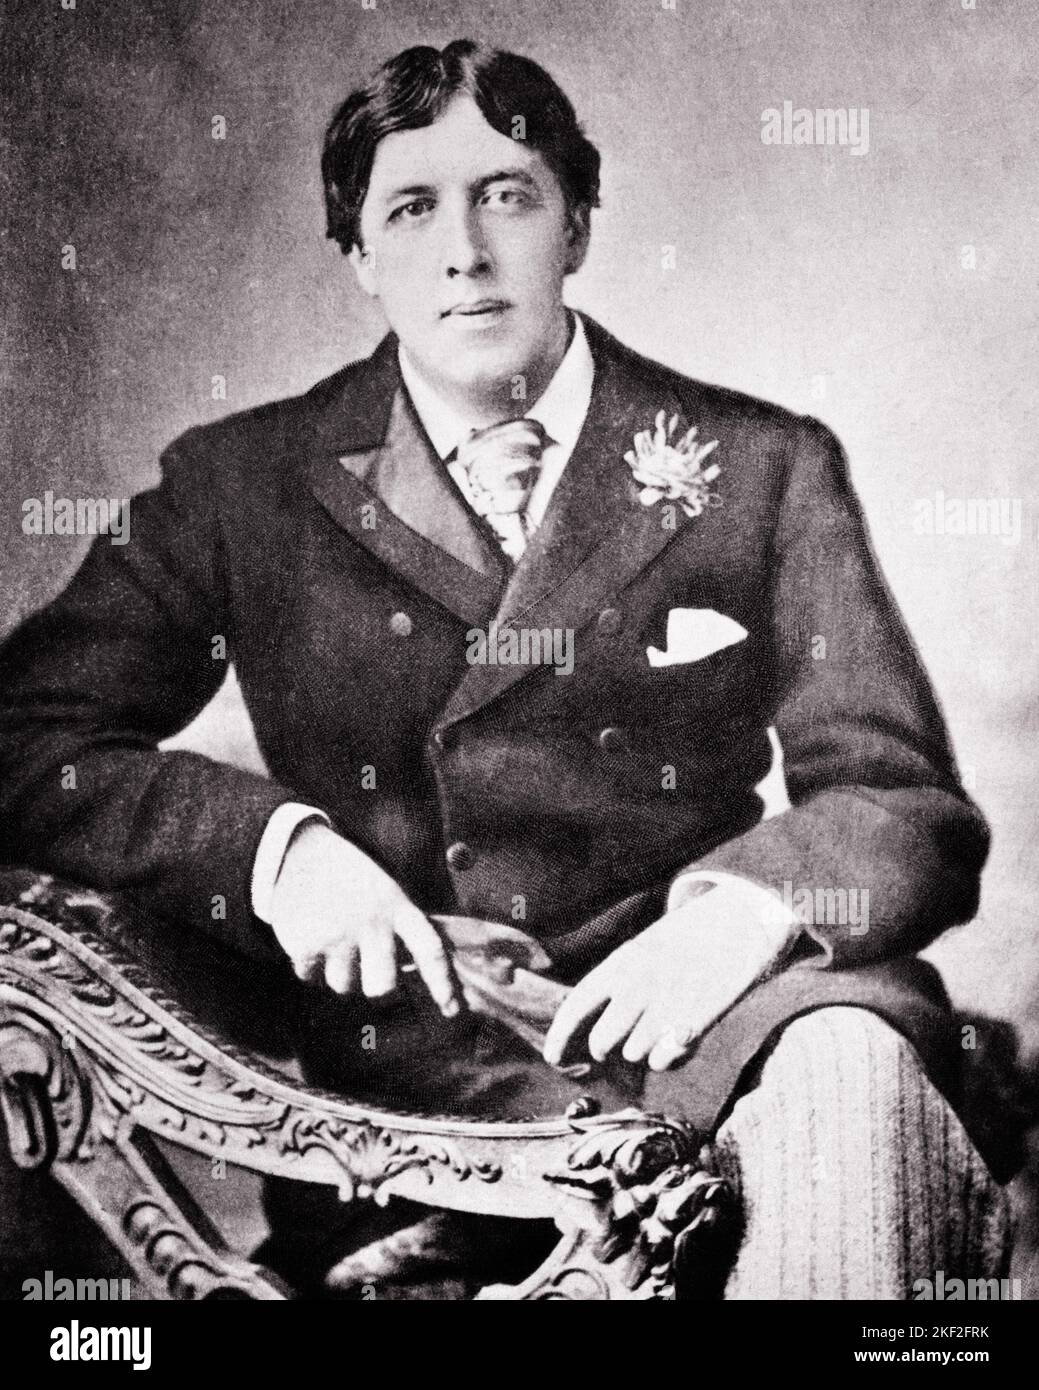 1880s PORTRAIT OF OSCAR WILDE IRISH POET AND PLAYWRIGHT AT AGE 35 - q59263 CPC001 HARS POET Stock Photo